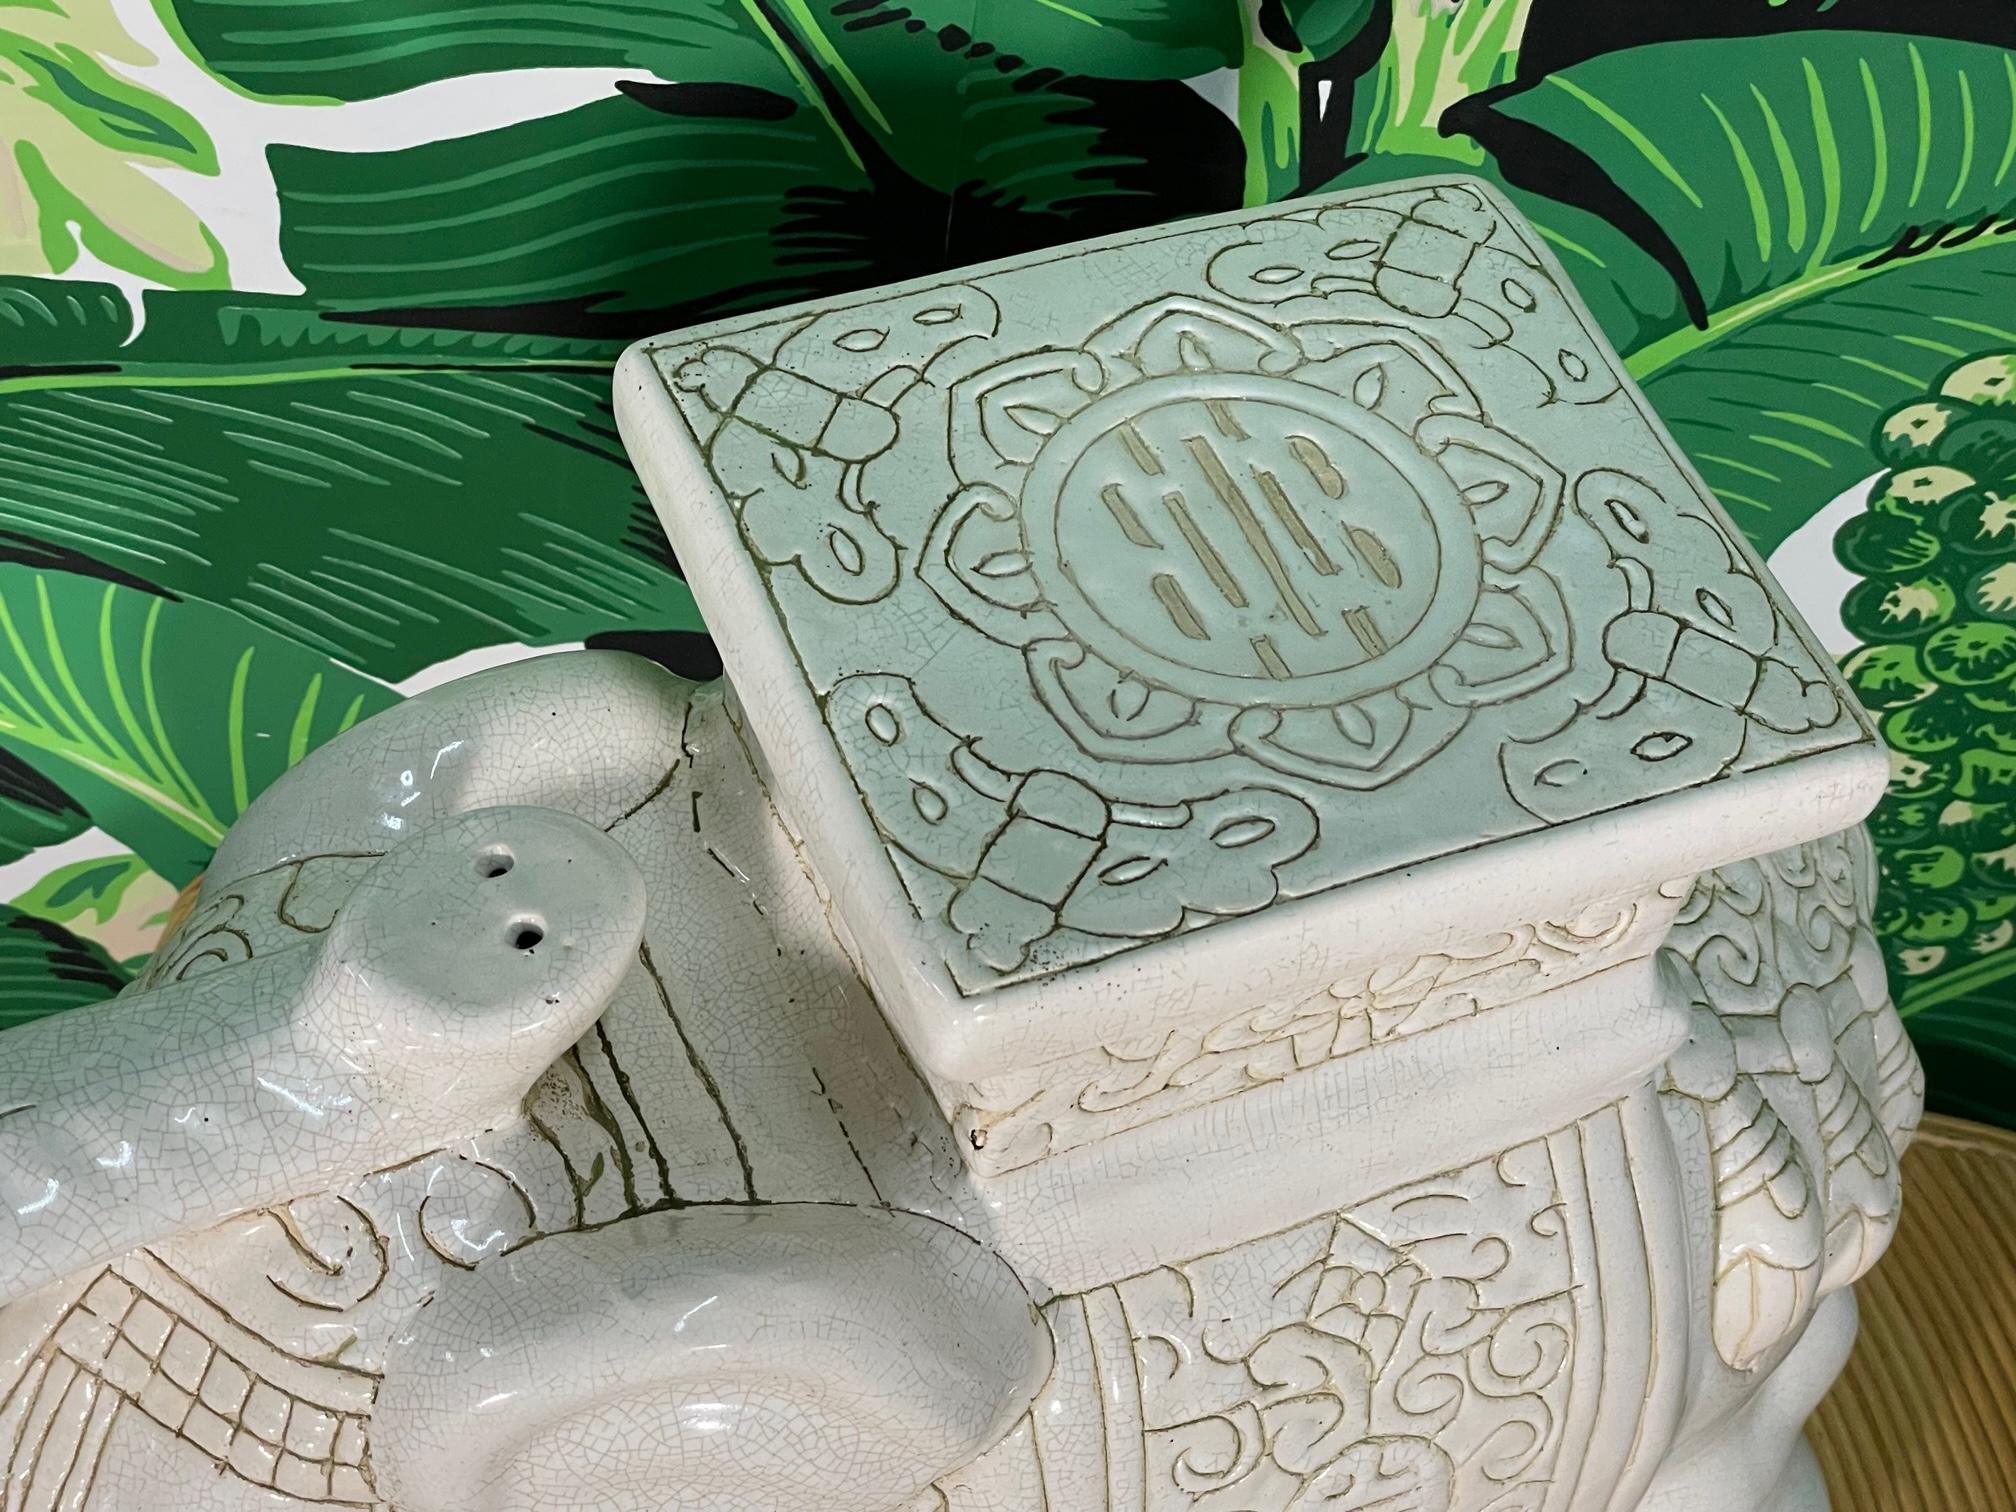 Ceramic Chinoiserie Elephant Garden Stool with Trunk Up In Good Condition For Sale In Jacksonville, FL